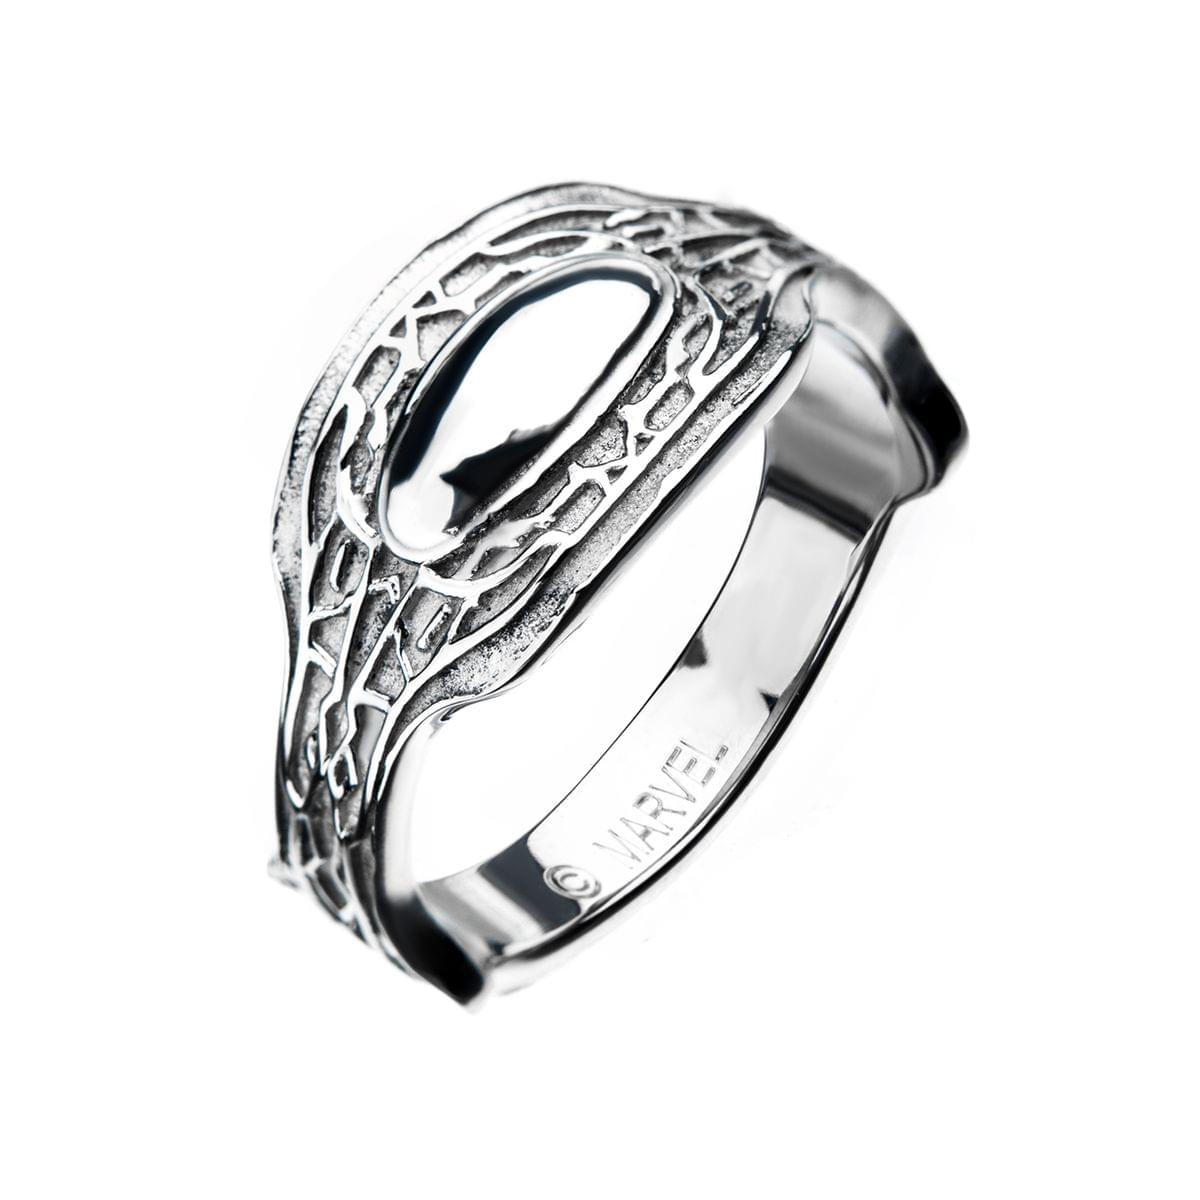 Marvel Black Panther Stainless Steel Ring